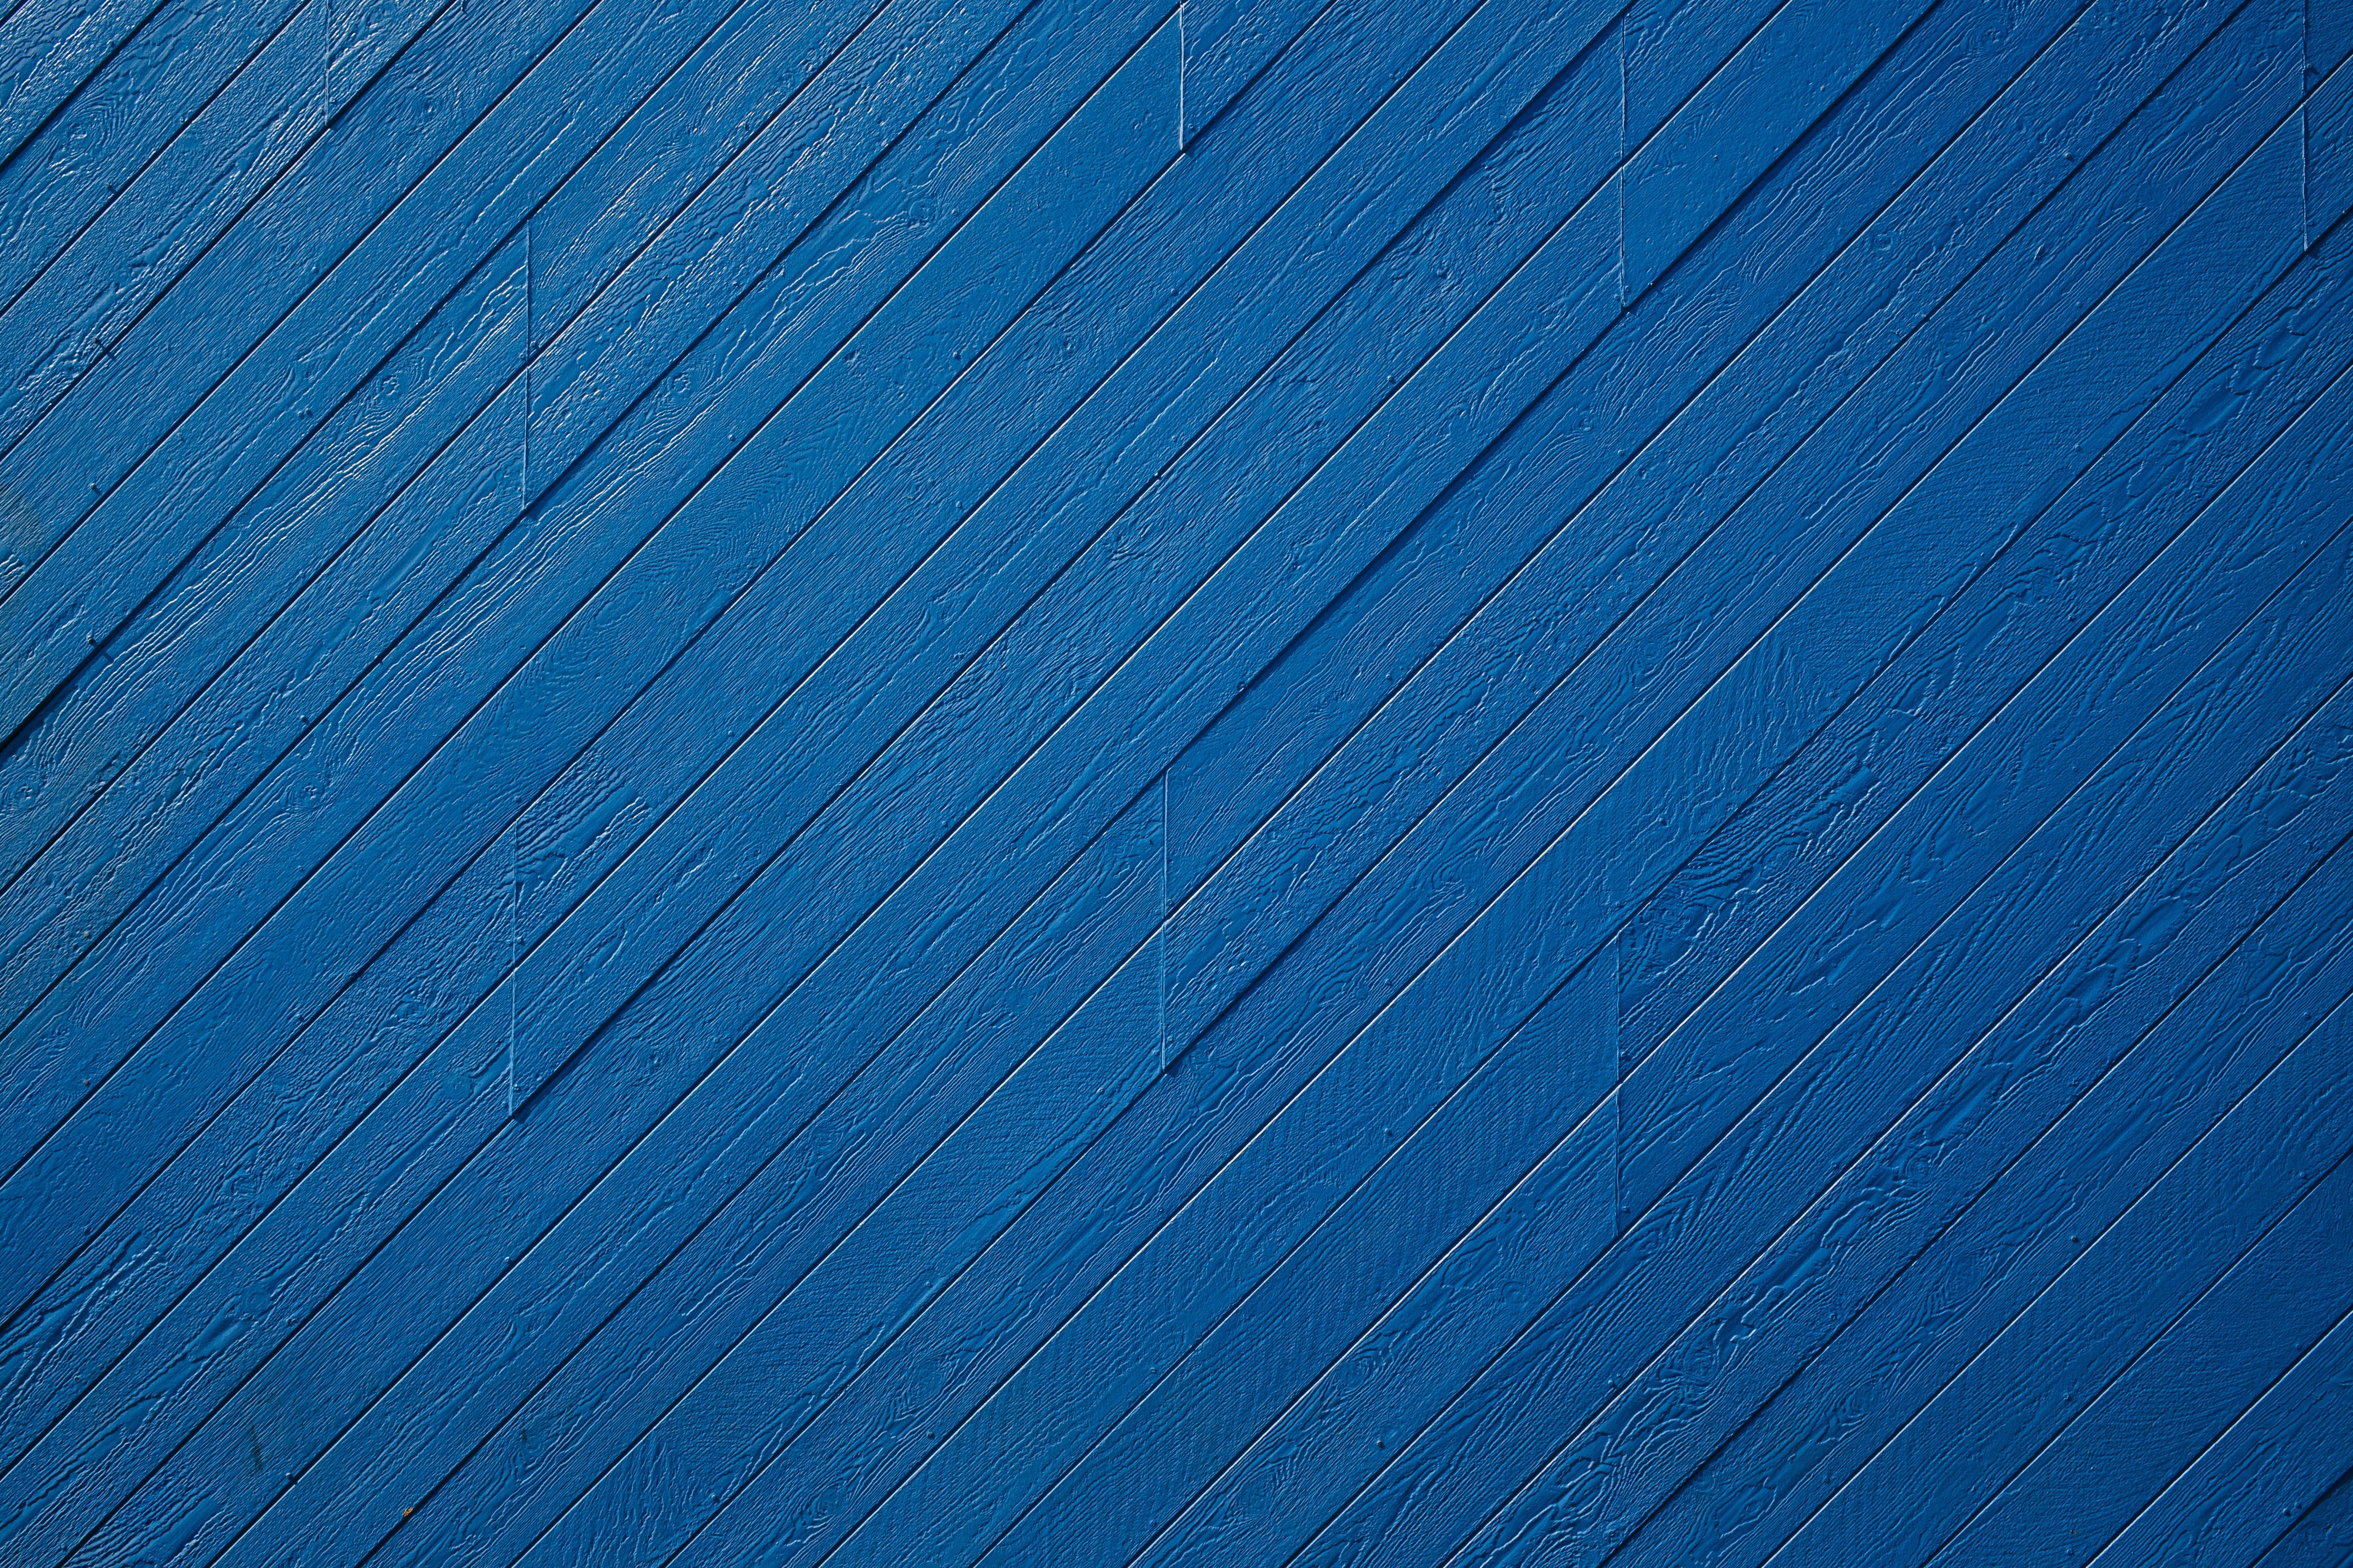 textures, obliquely, blue, wood, wooden, texture, paint, wall